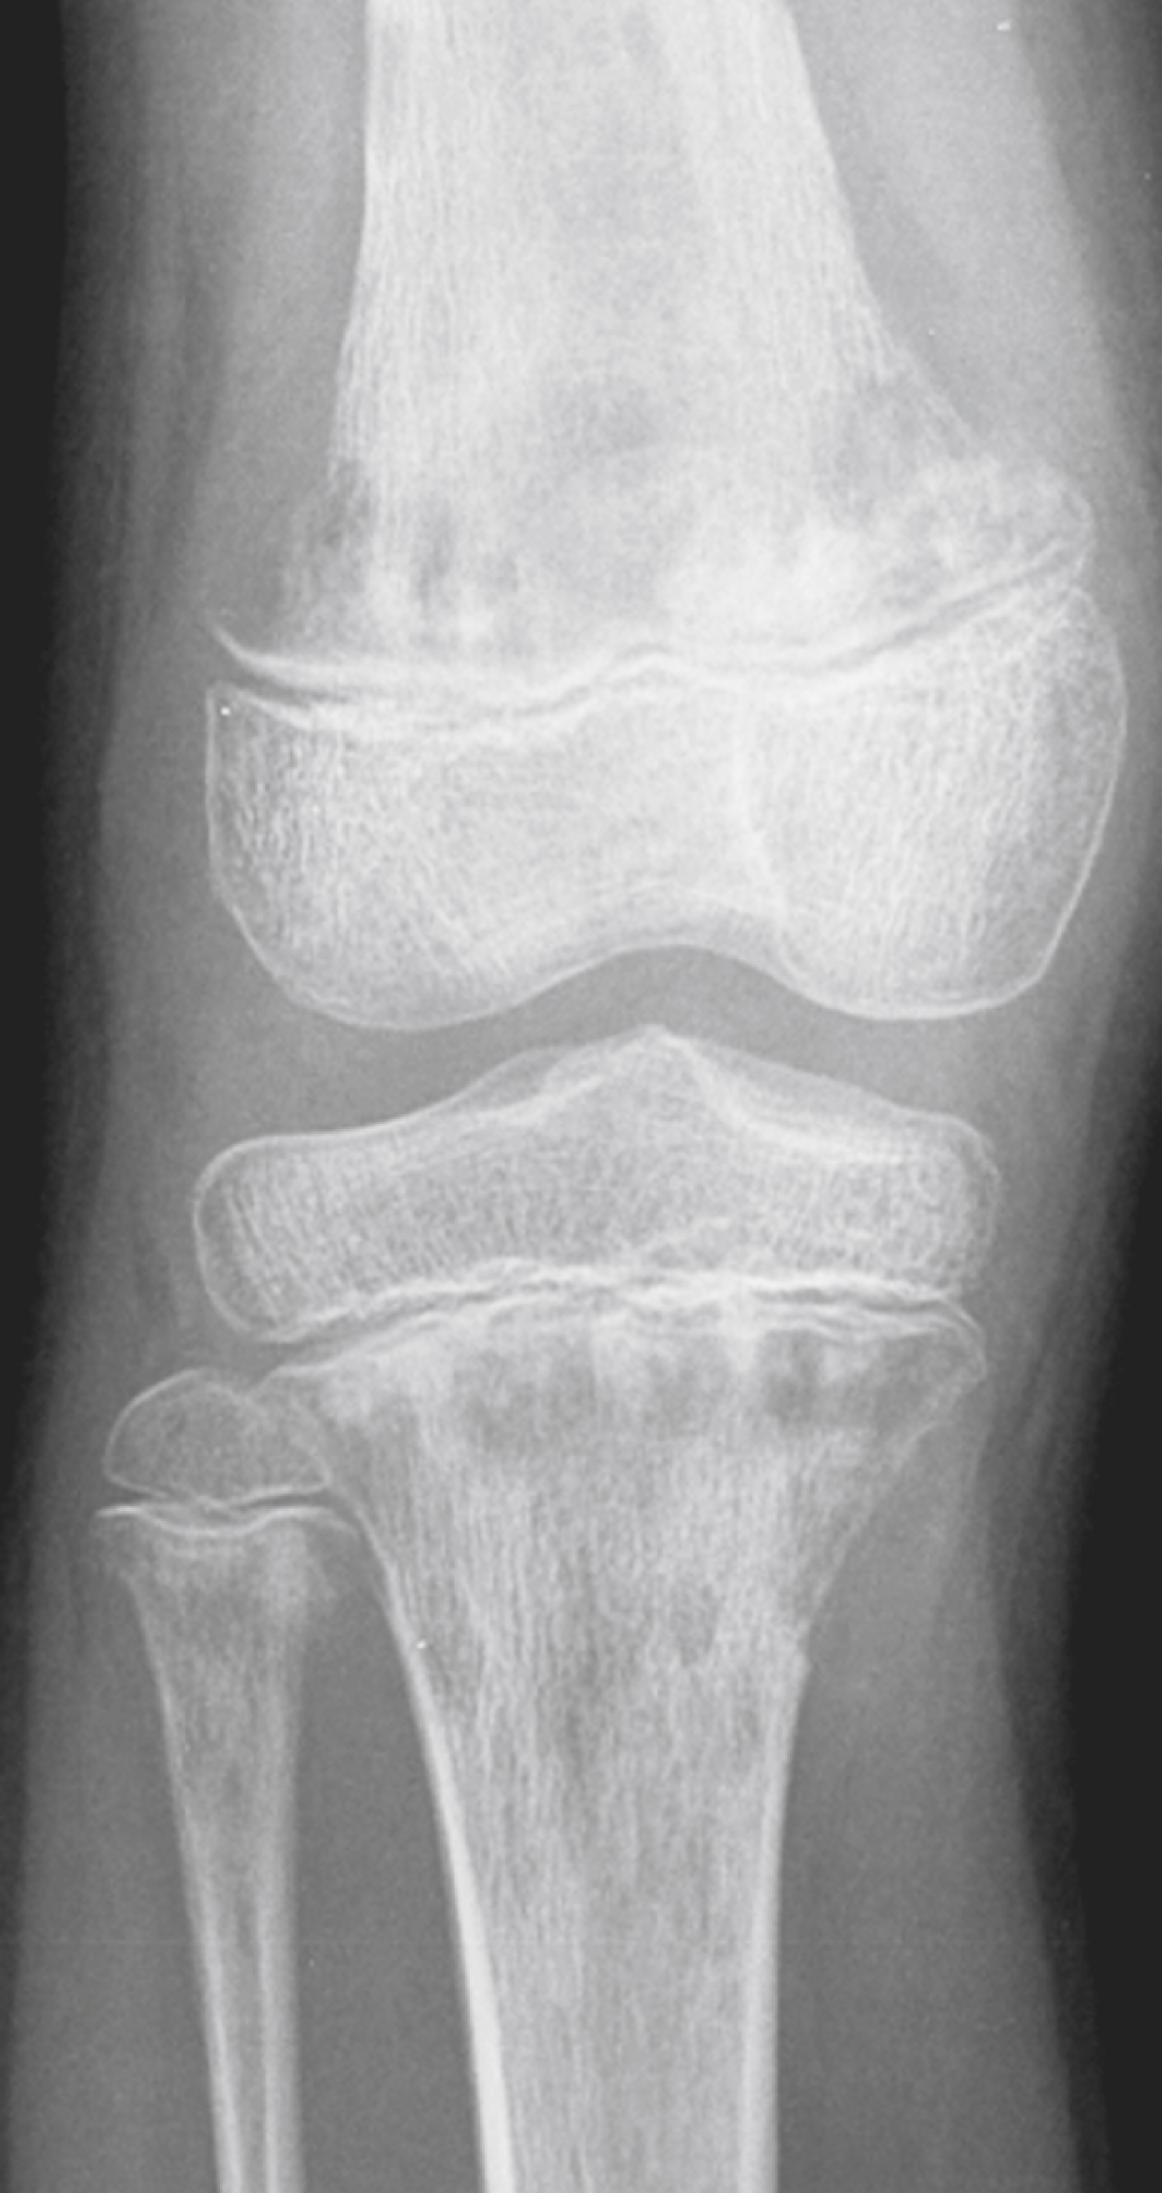 Fig. 47.1, Acute lymphoblastic leukemia: Metaphyseal lucencies of the right femur, tibia, and fibula in a 5-year-old girl.